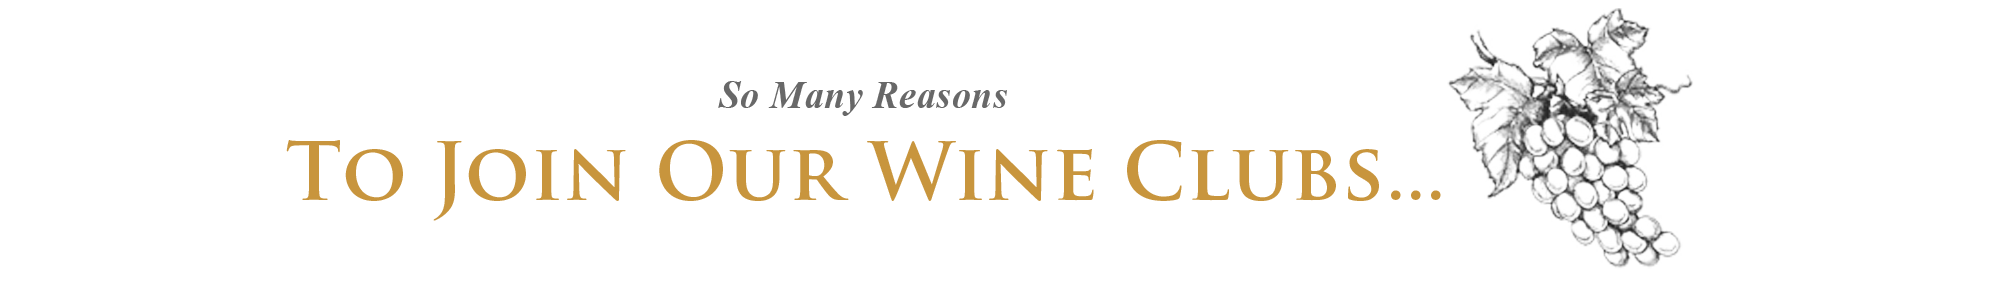 So Many Reasons To Join Our Wine Clubs...